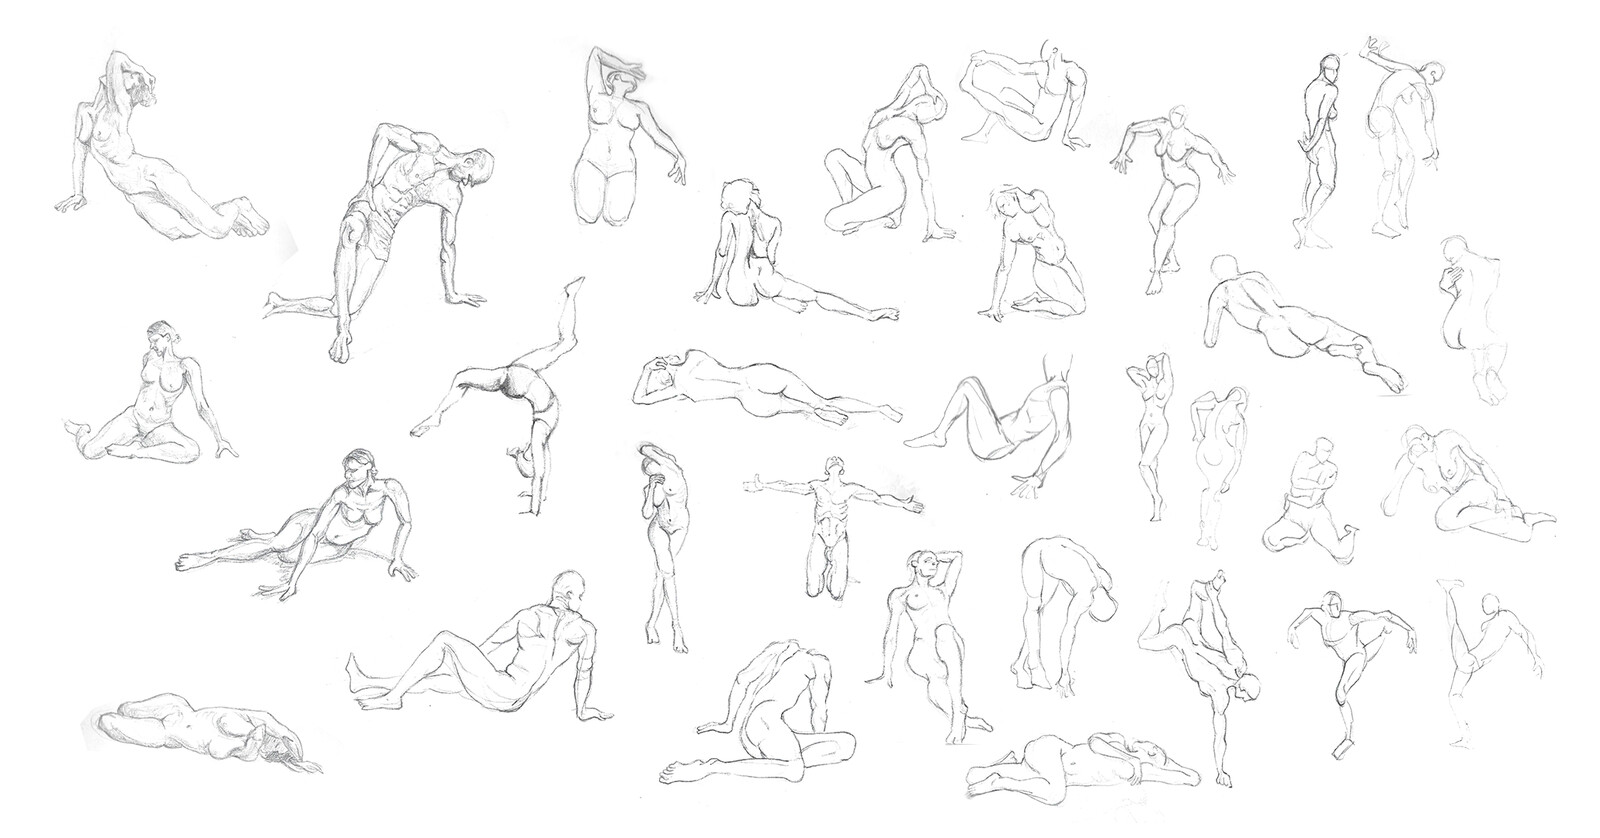 Yet more life drawing